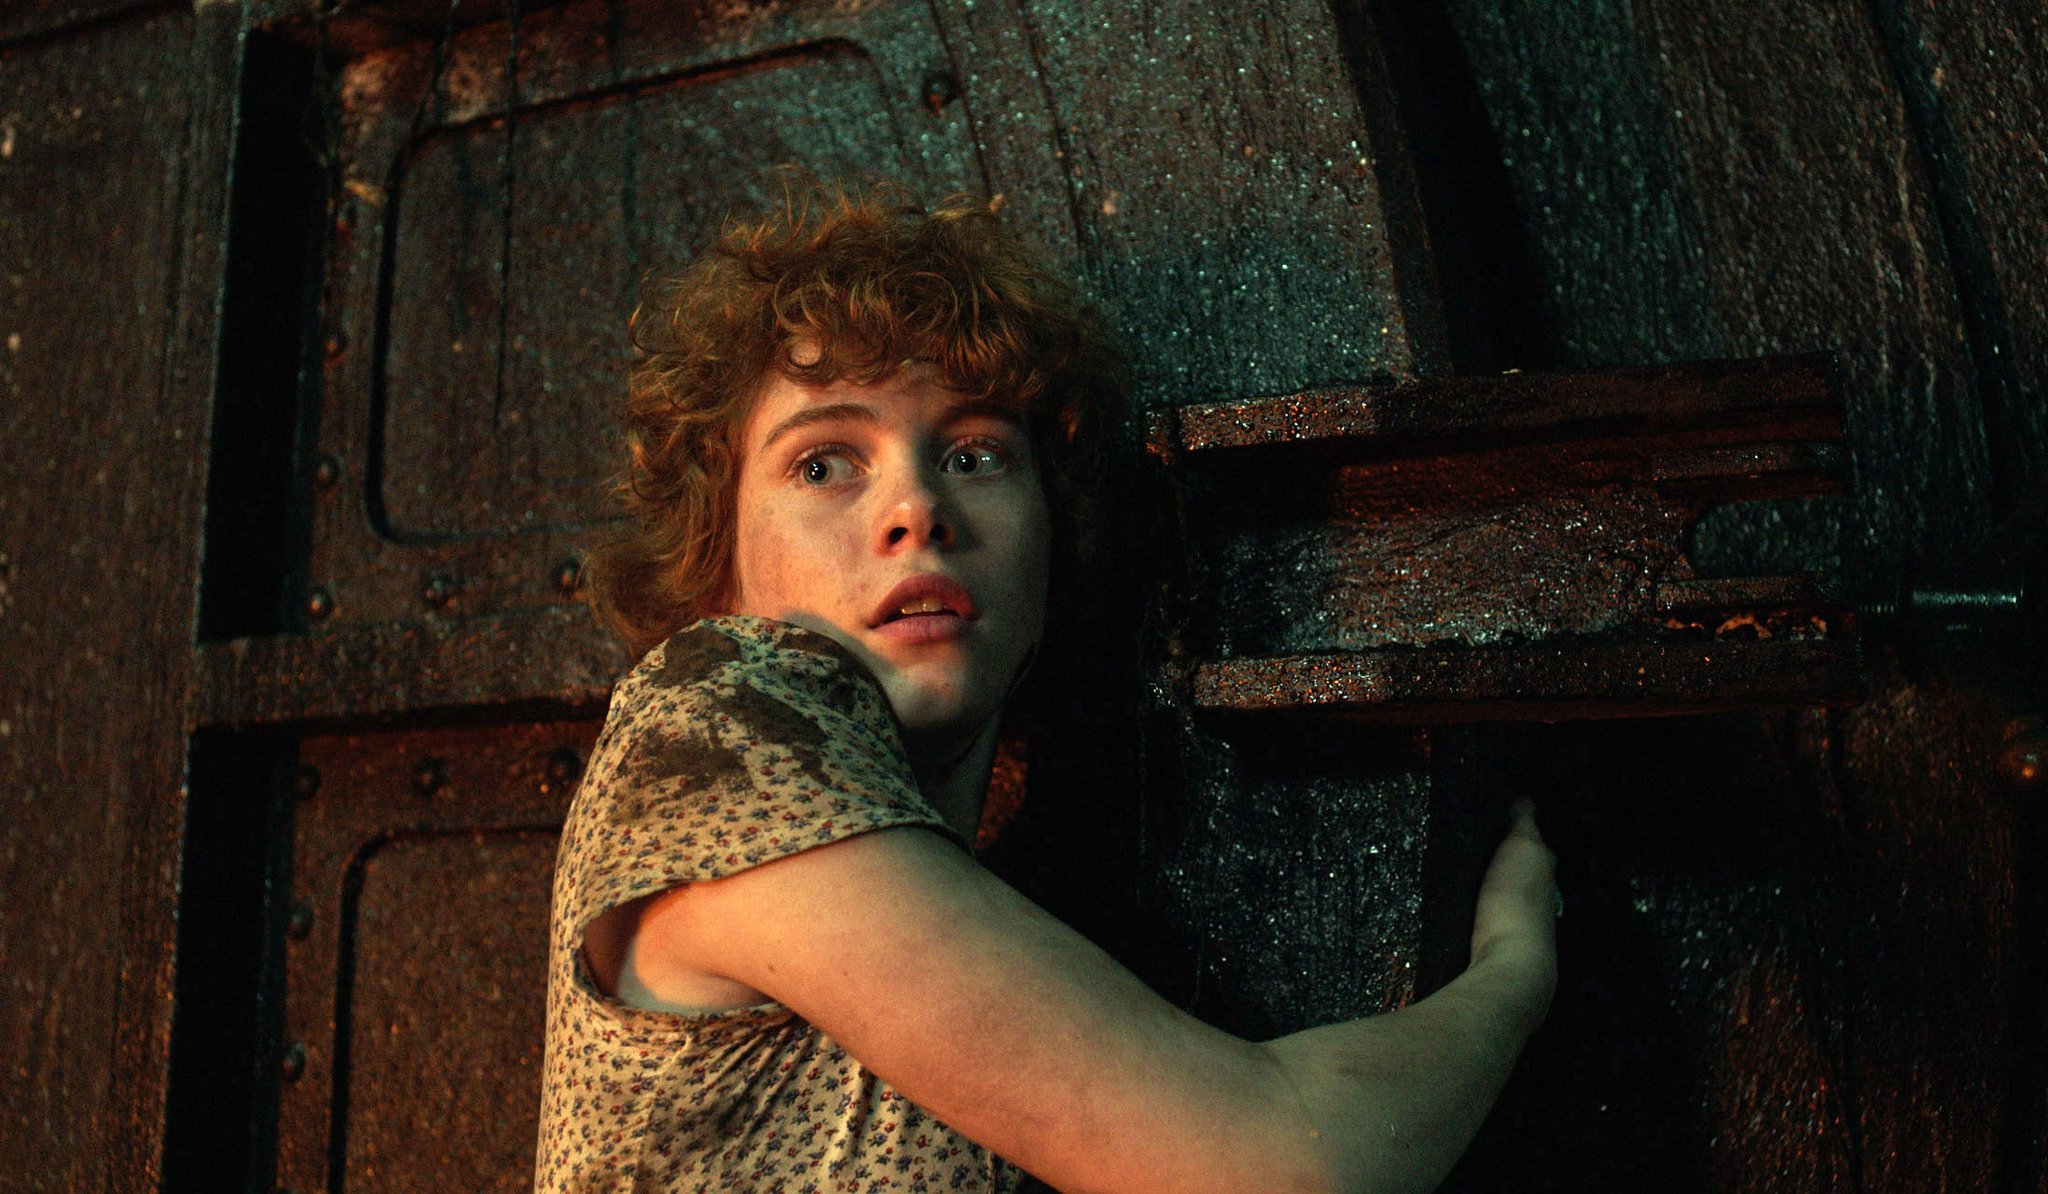 Press still from It that features the character Beverly Marsh.